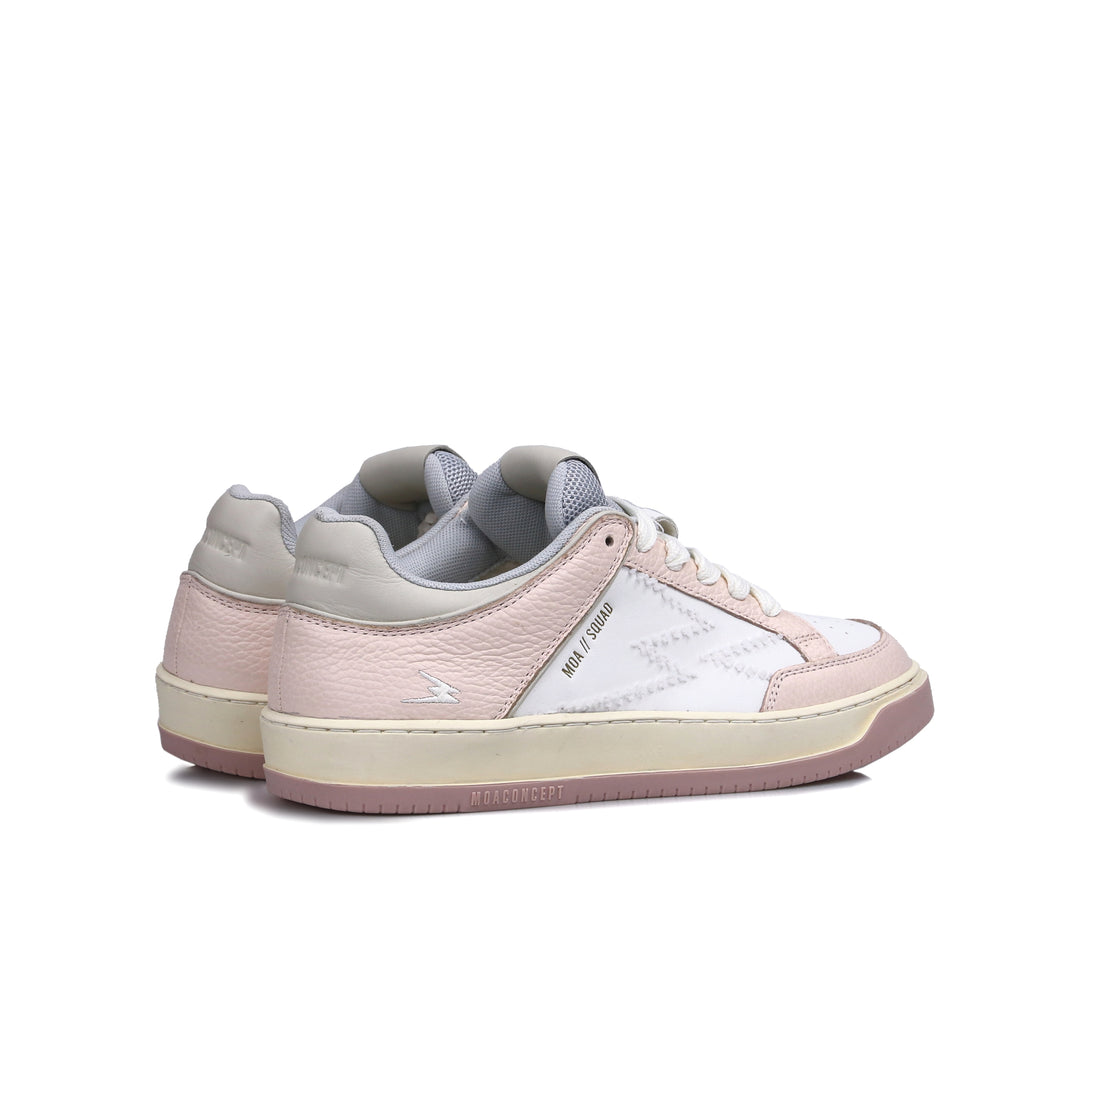 Squad sneaker with embroidered logo and pink details